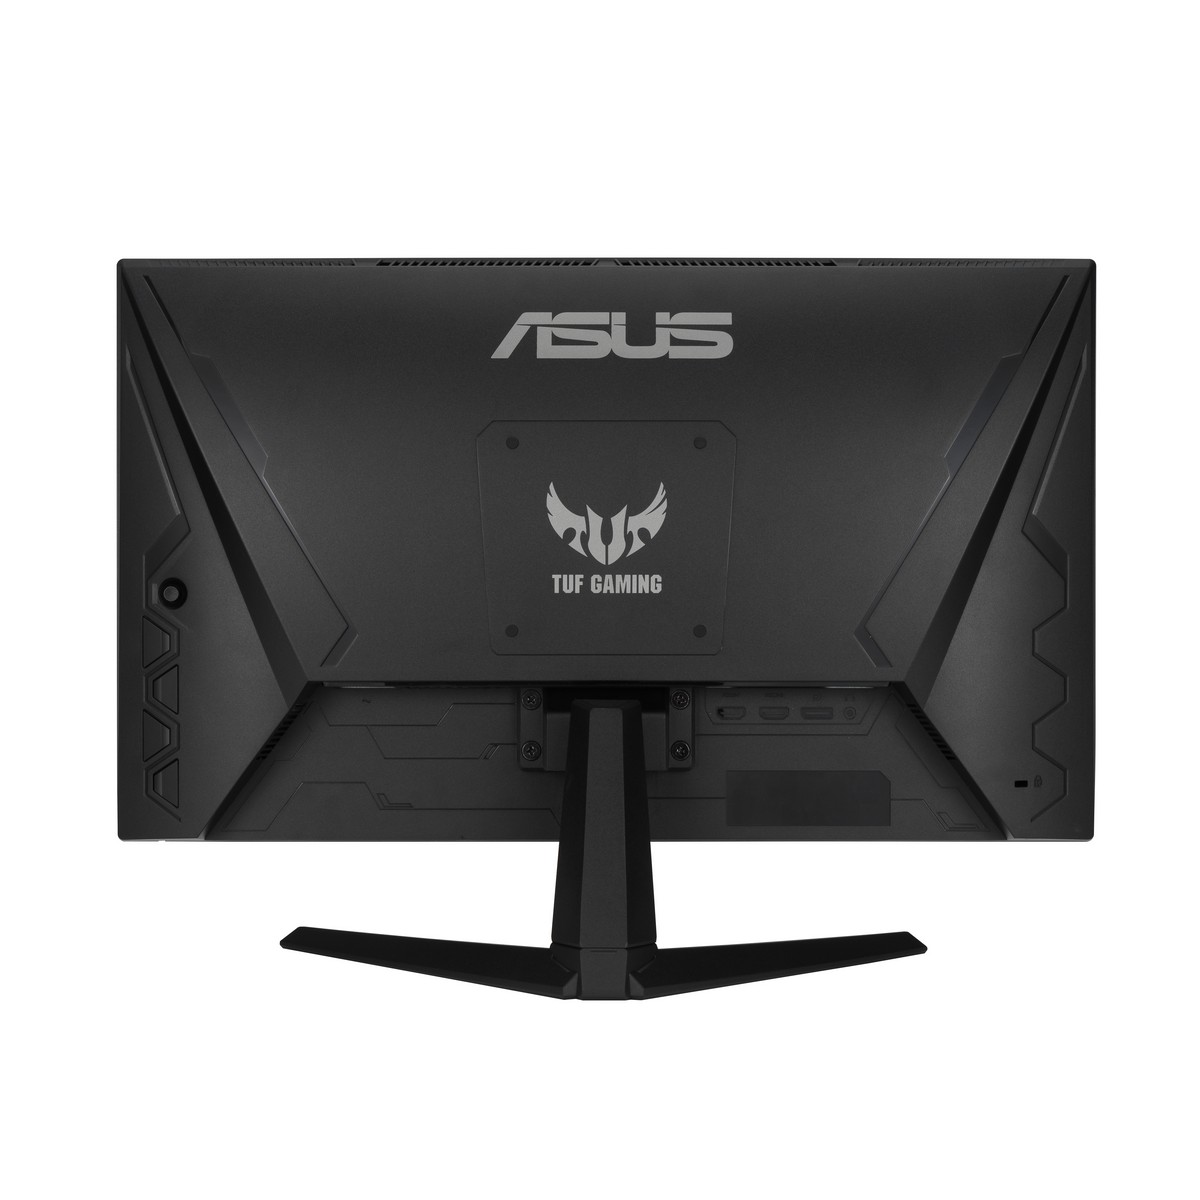 Asus - ASUS 24" TUF Gaming VG249Q1A FHD IPS 165Hz 1ms FreeSync/G-Sync Widescreen Gaming Monitor